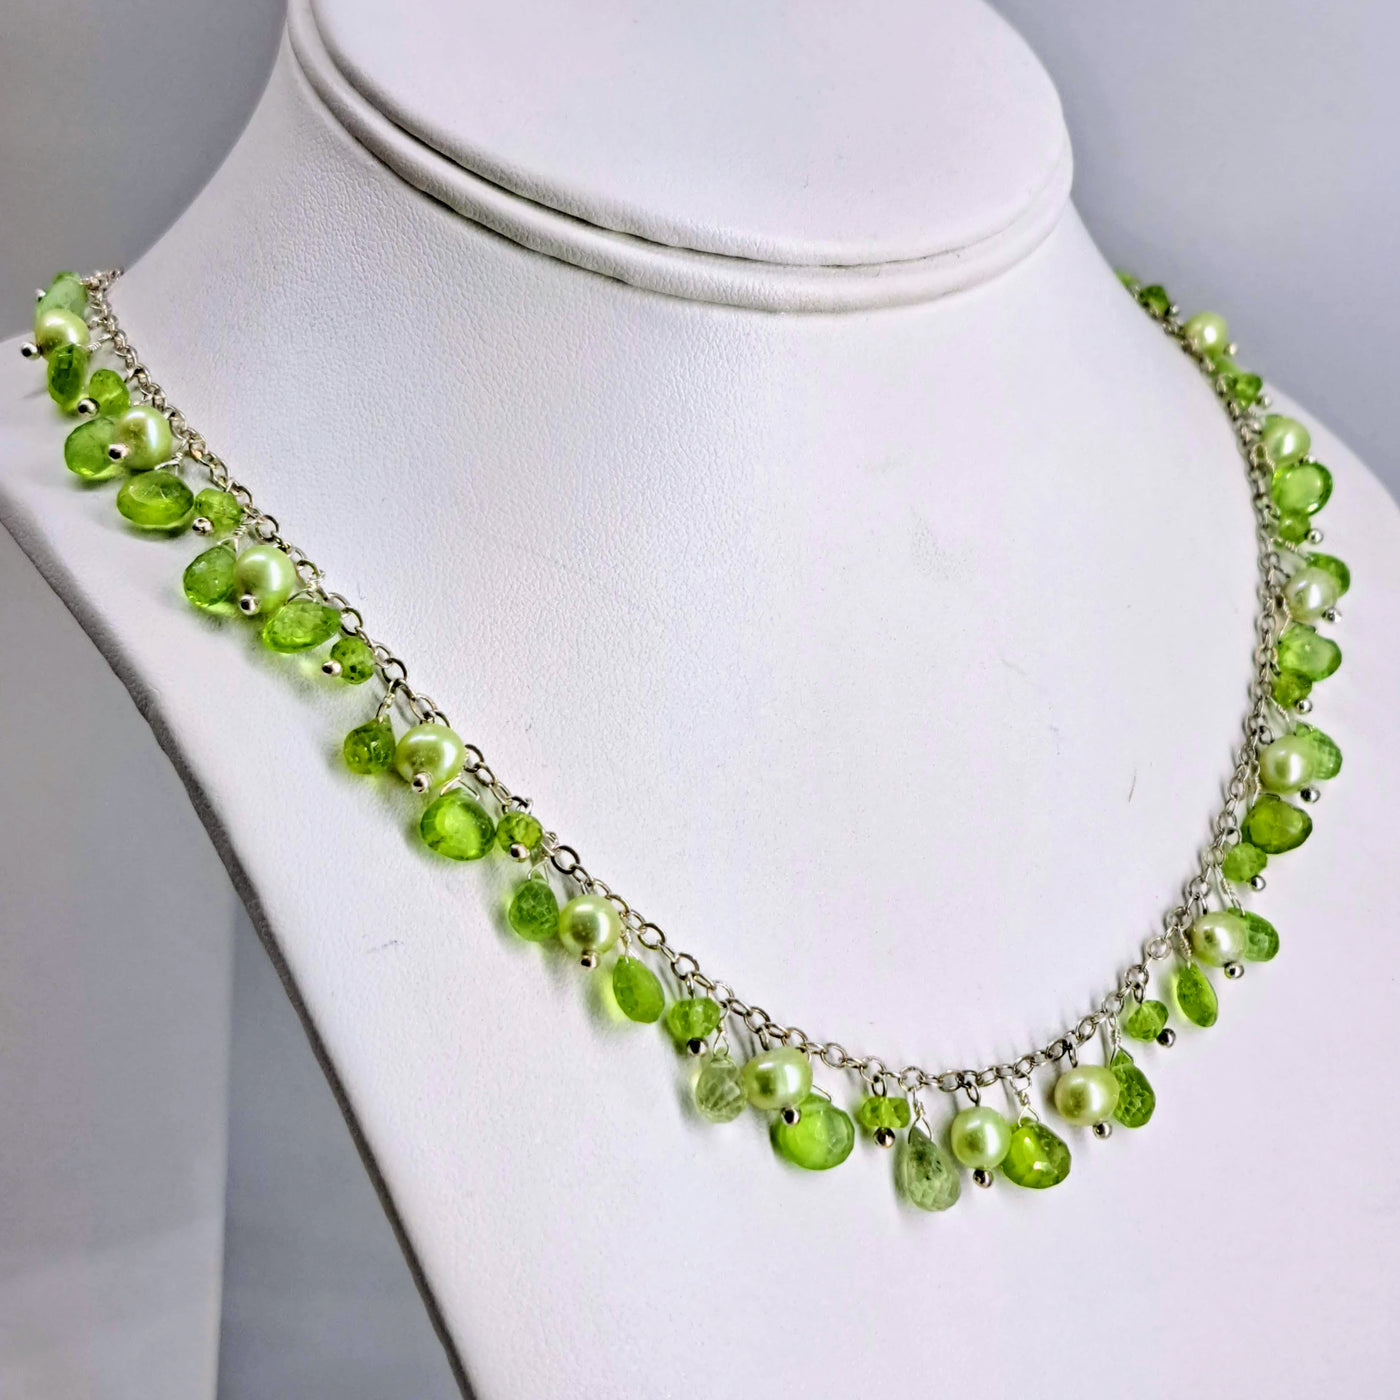 "Charmed Life" 18" Necklace - Your Choice Of Peridot, Amethyst, OR Citrine, Pearls, Sterling